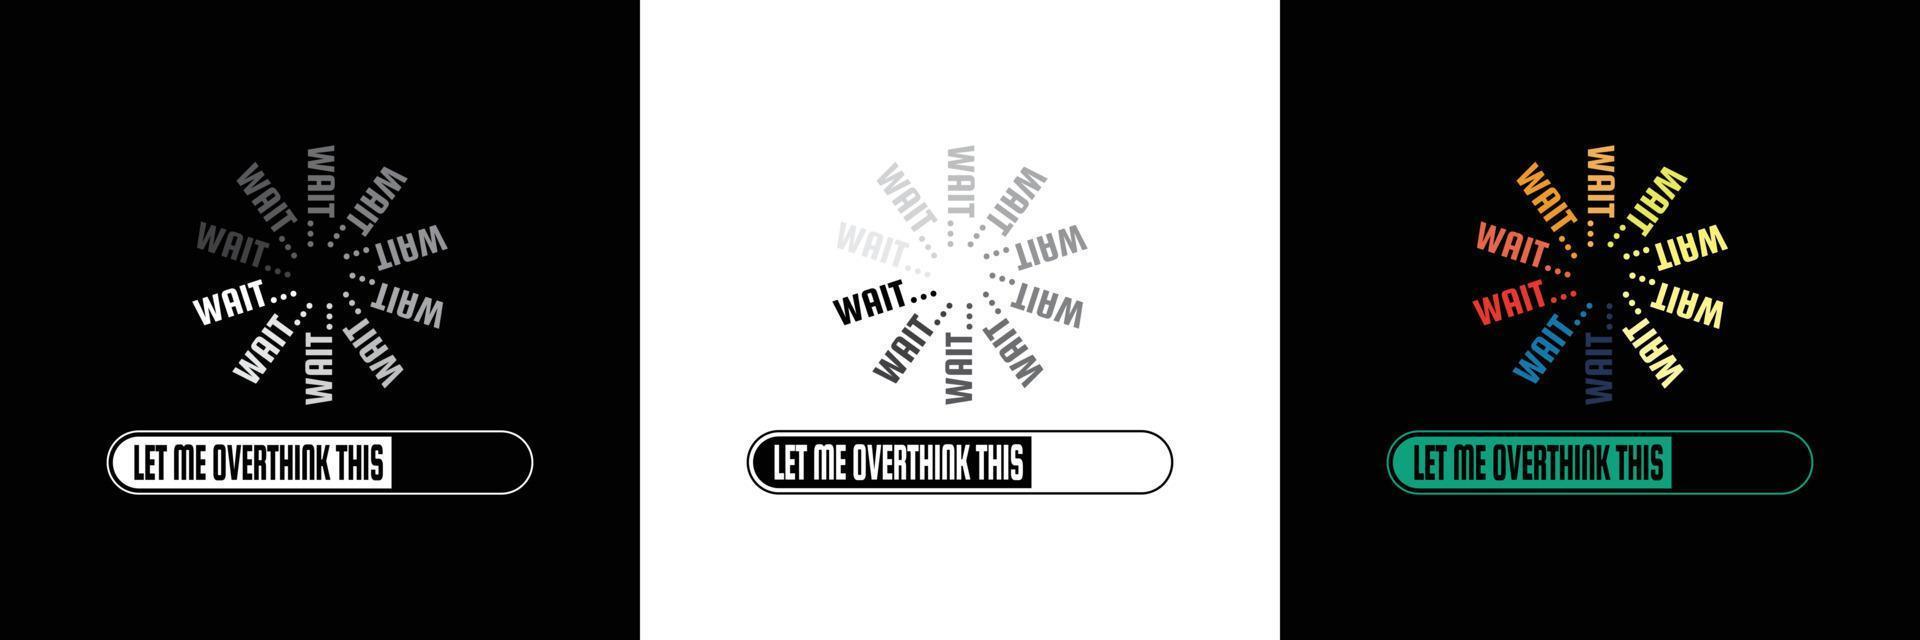 Wait Let Me Overthink This text on loading bar illustration isolated on black and white background. vector